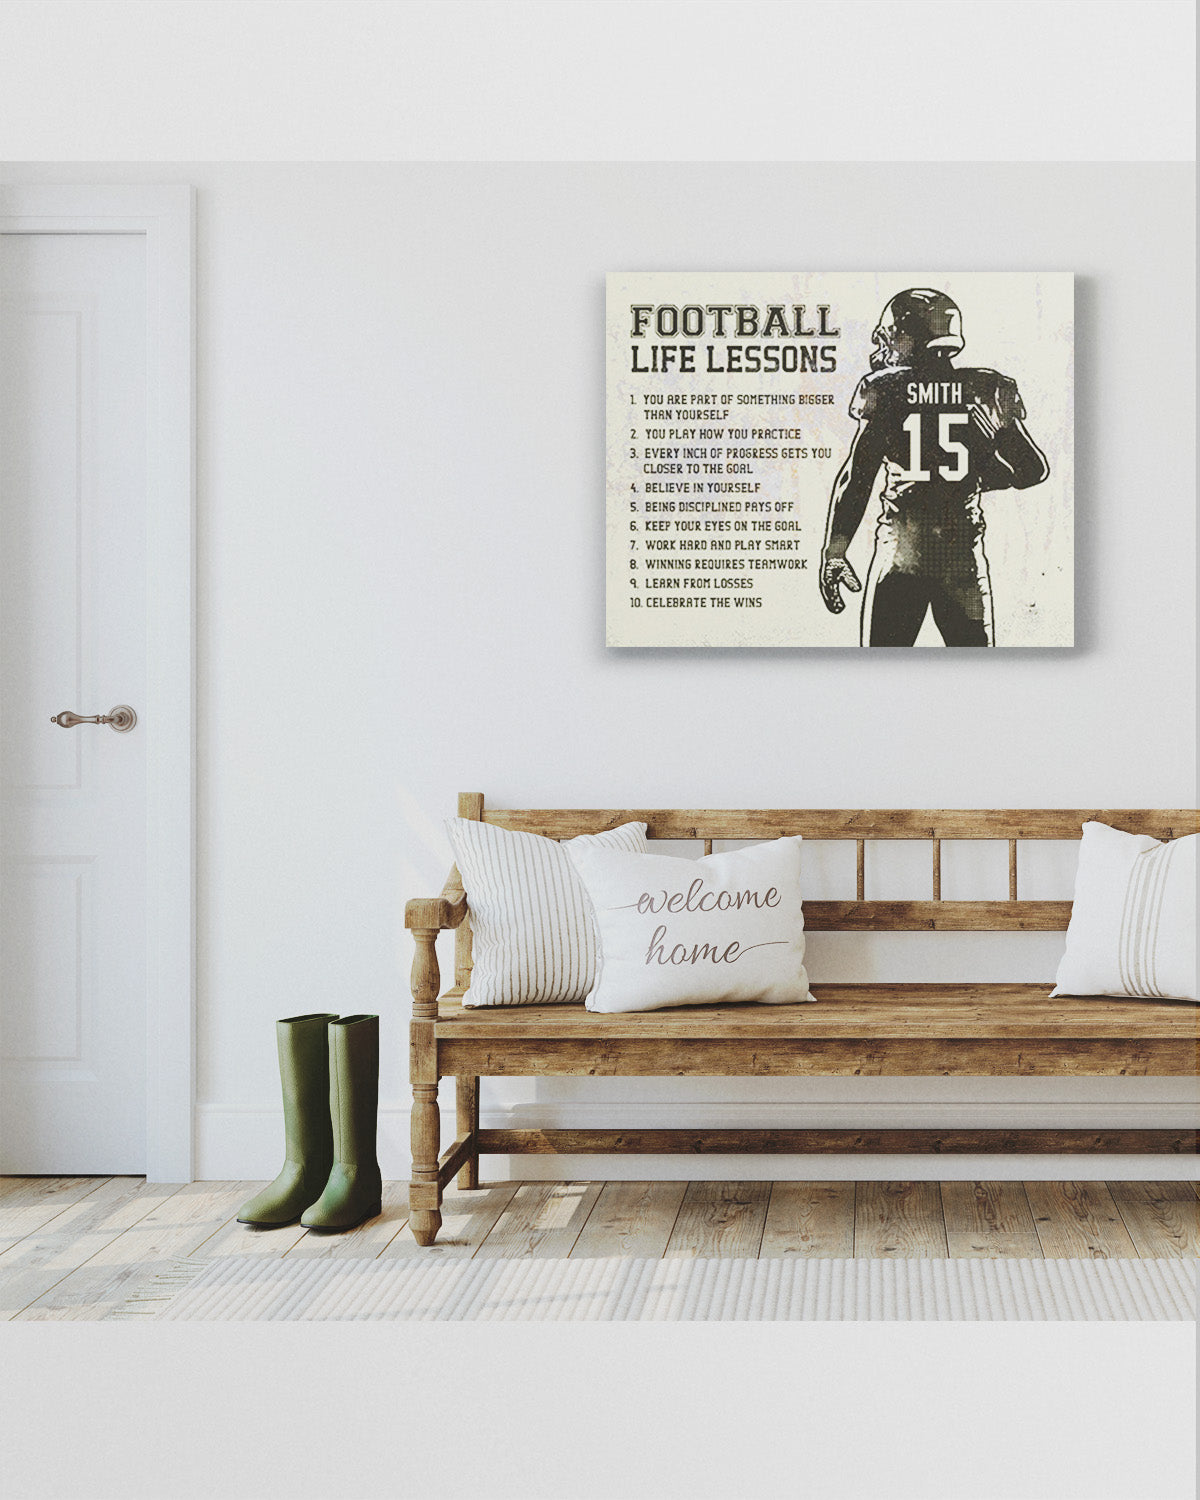 Football Life Lessons - Customizable with Last Name - Motivational Football Wall Art for Boys Bedroom, Locker Room, or Coach Gift - Inspirational Football Quotes